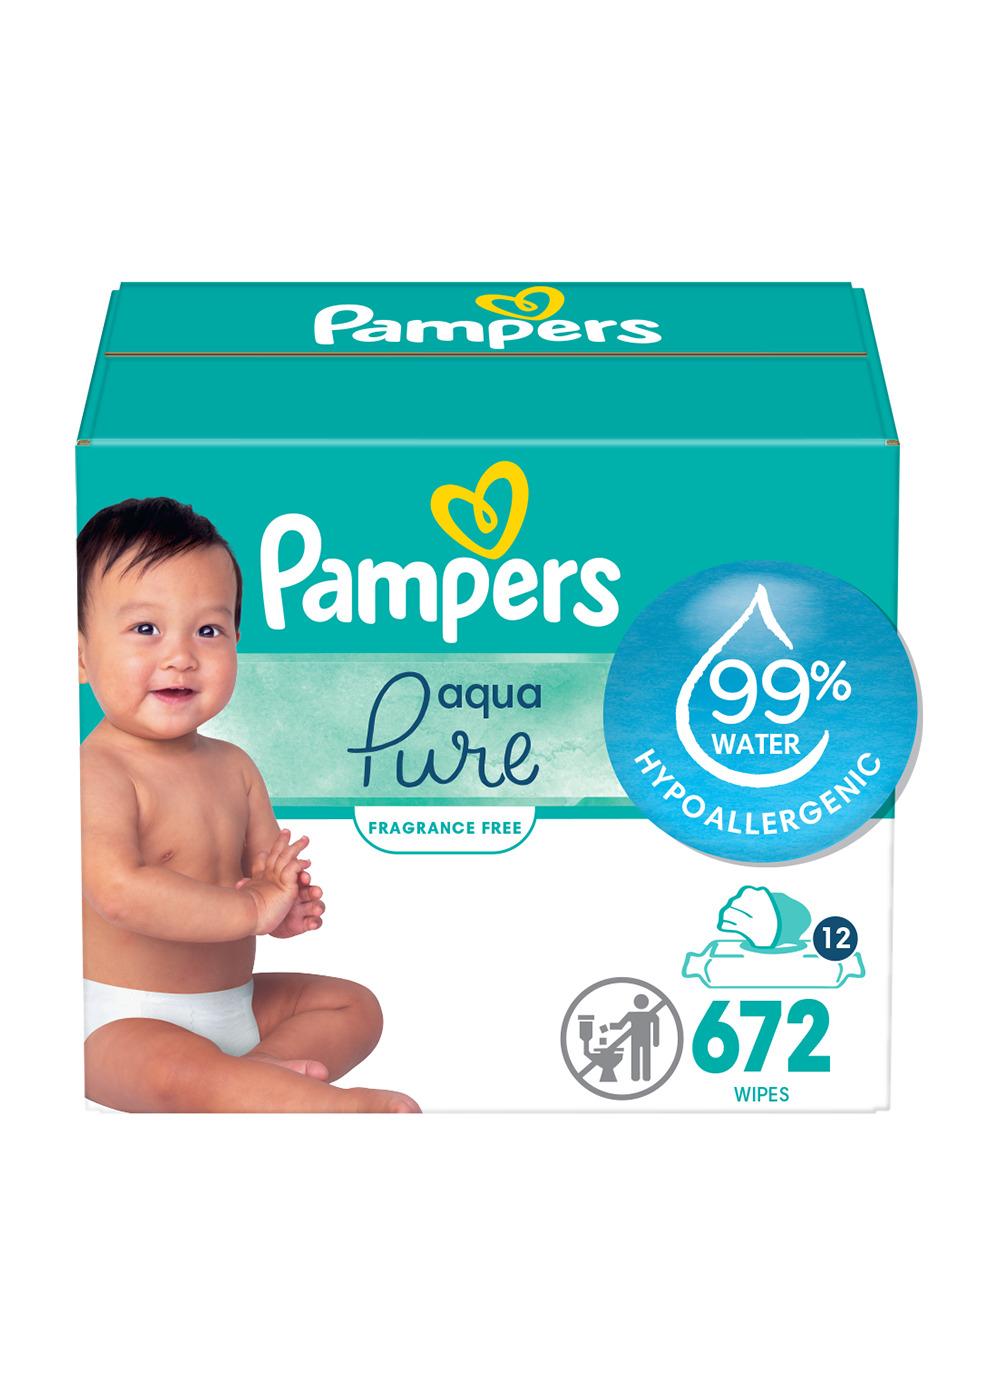 Pampers Aqua Pure Baby Wipes 12 pk; image 1 of 9